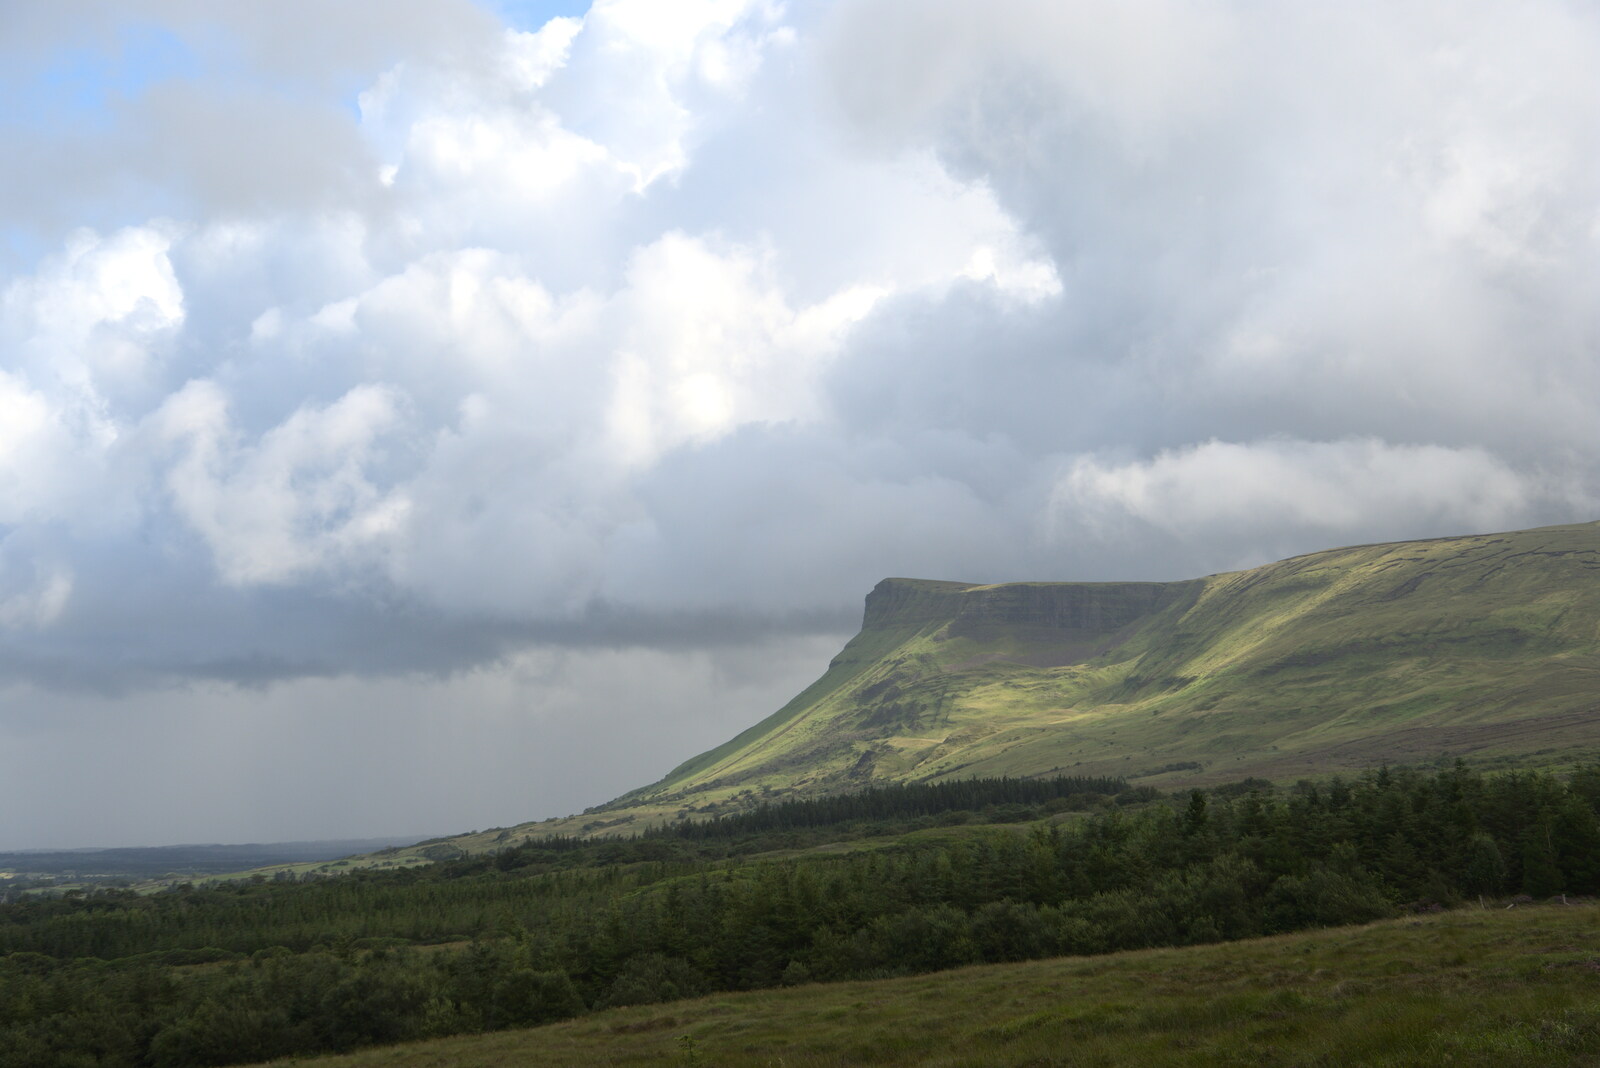 Another hill from Walks Around Benbulben and Carrowmore, County Sligo, Ireland - 13th August 2021